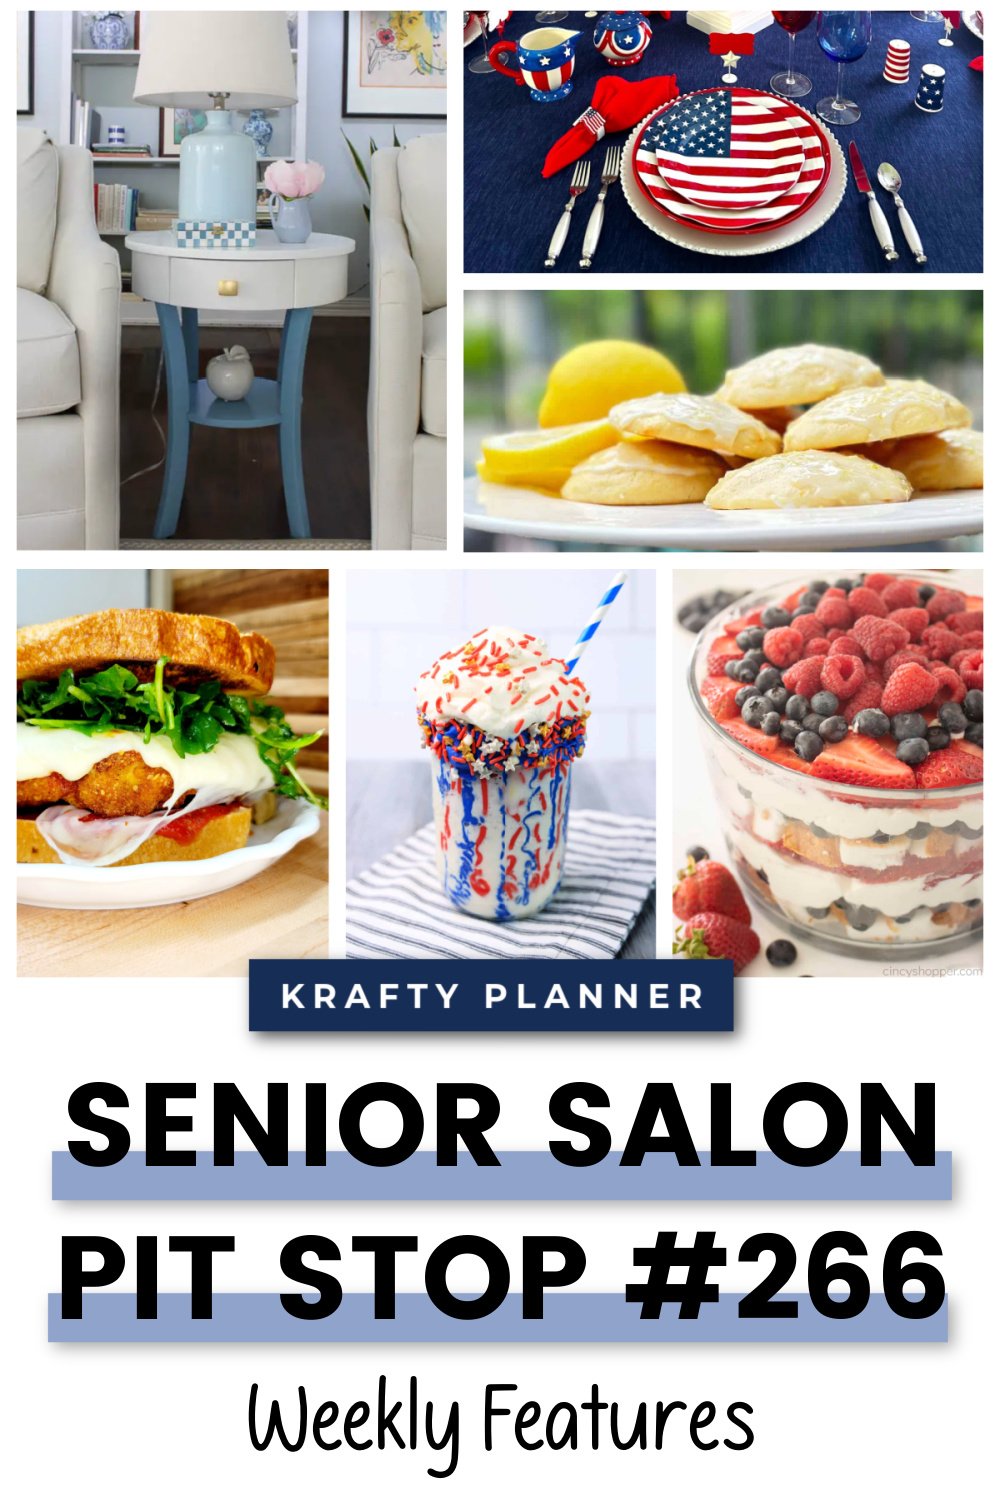 Senior Salon Pit Stop  #266 Weekly Features